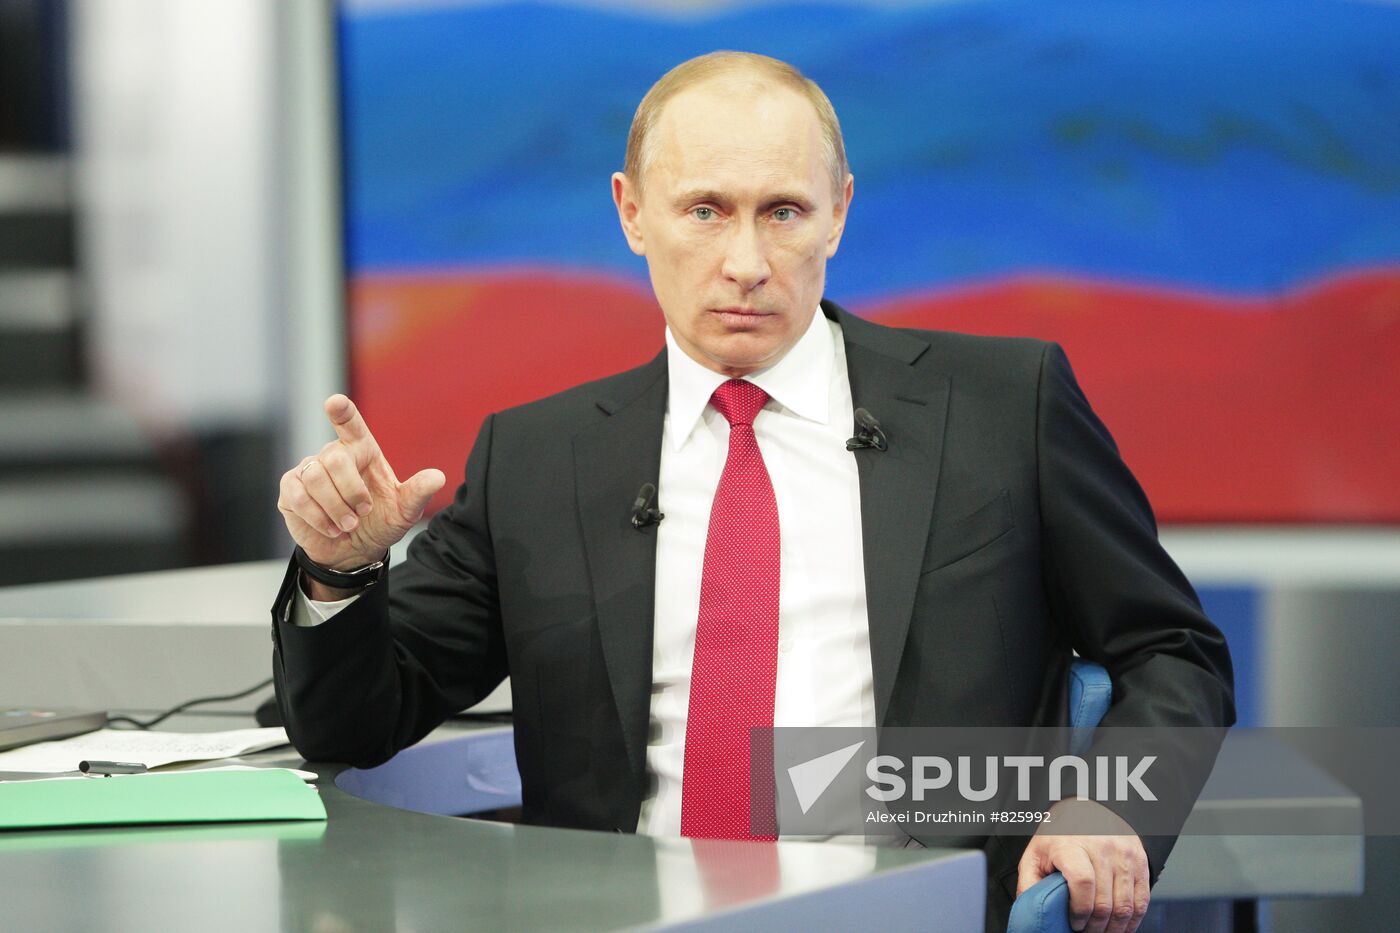 Televised live call-in show with Vladimir Putin